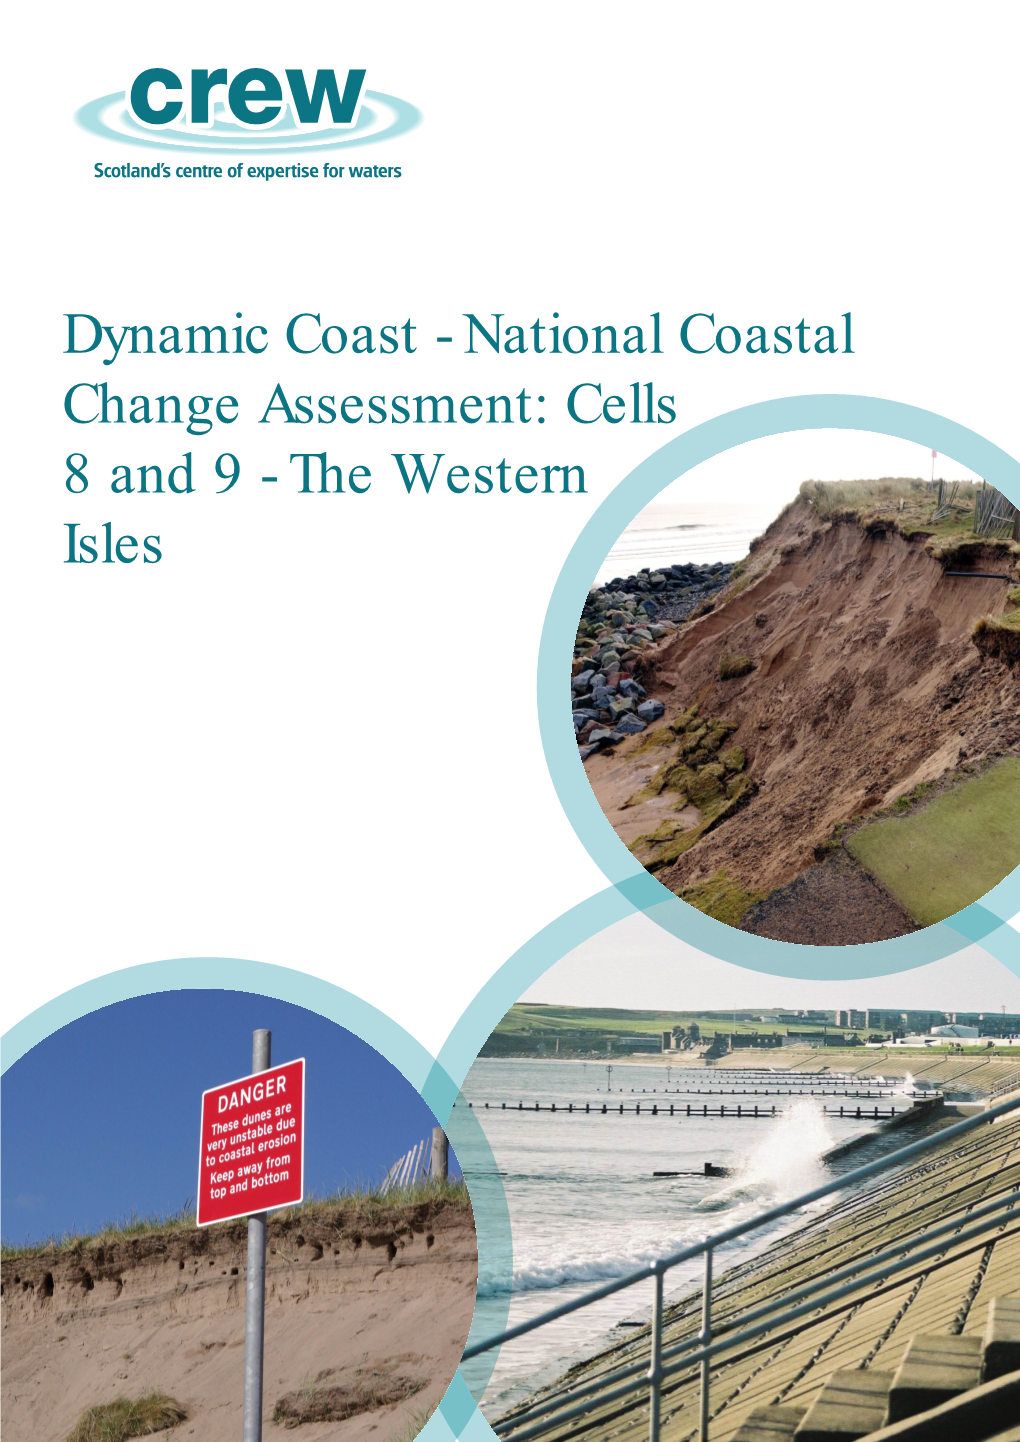 National Coastal Change Assessment: Cells 8 and 9 - the Western Isles Scotland’S Centre of Expertise for Waters